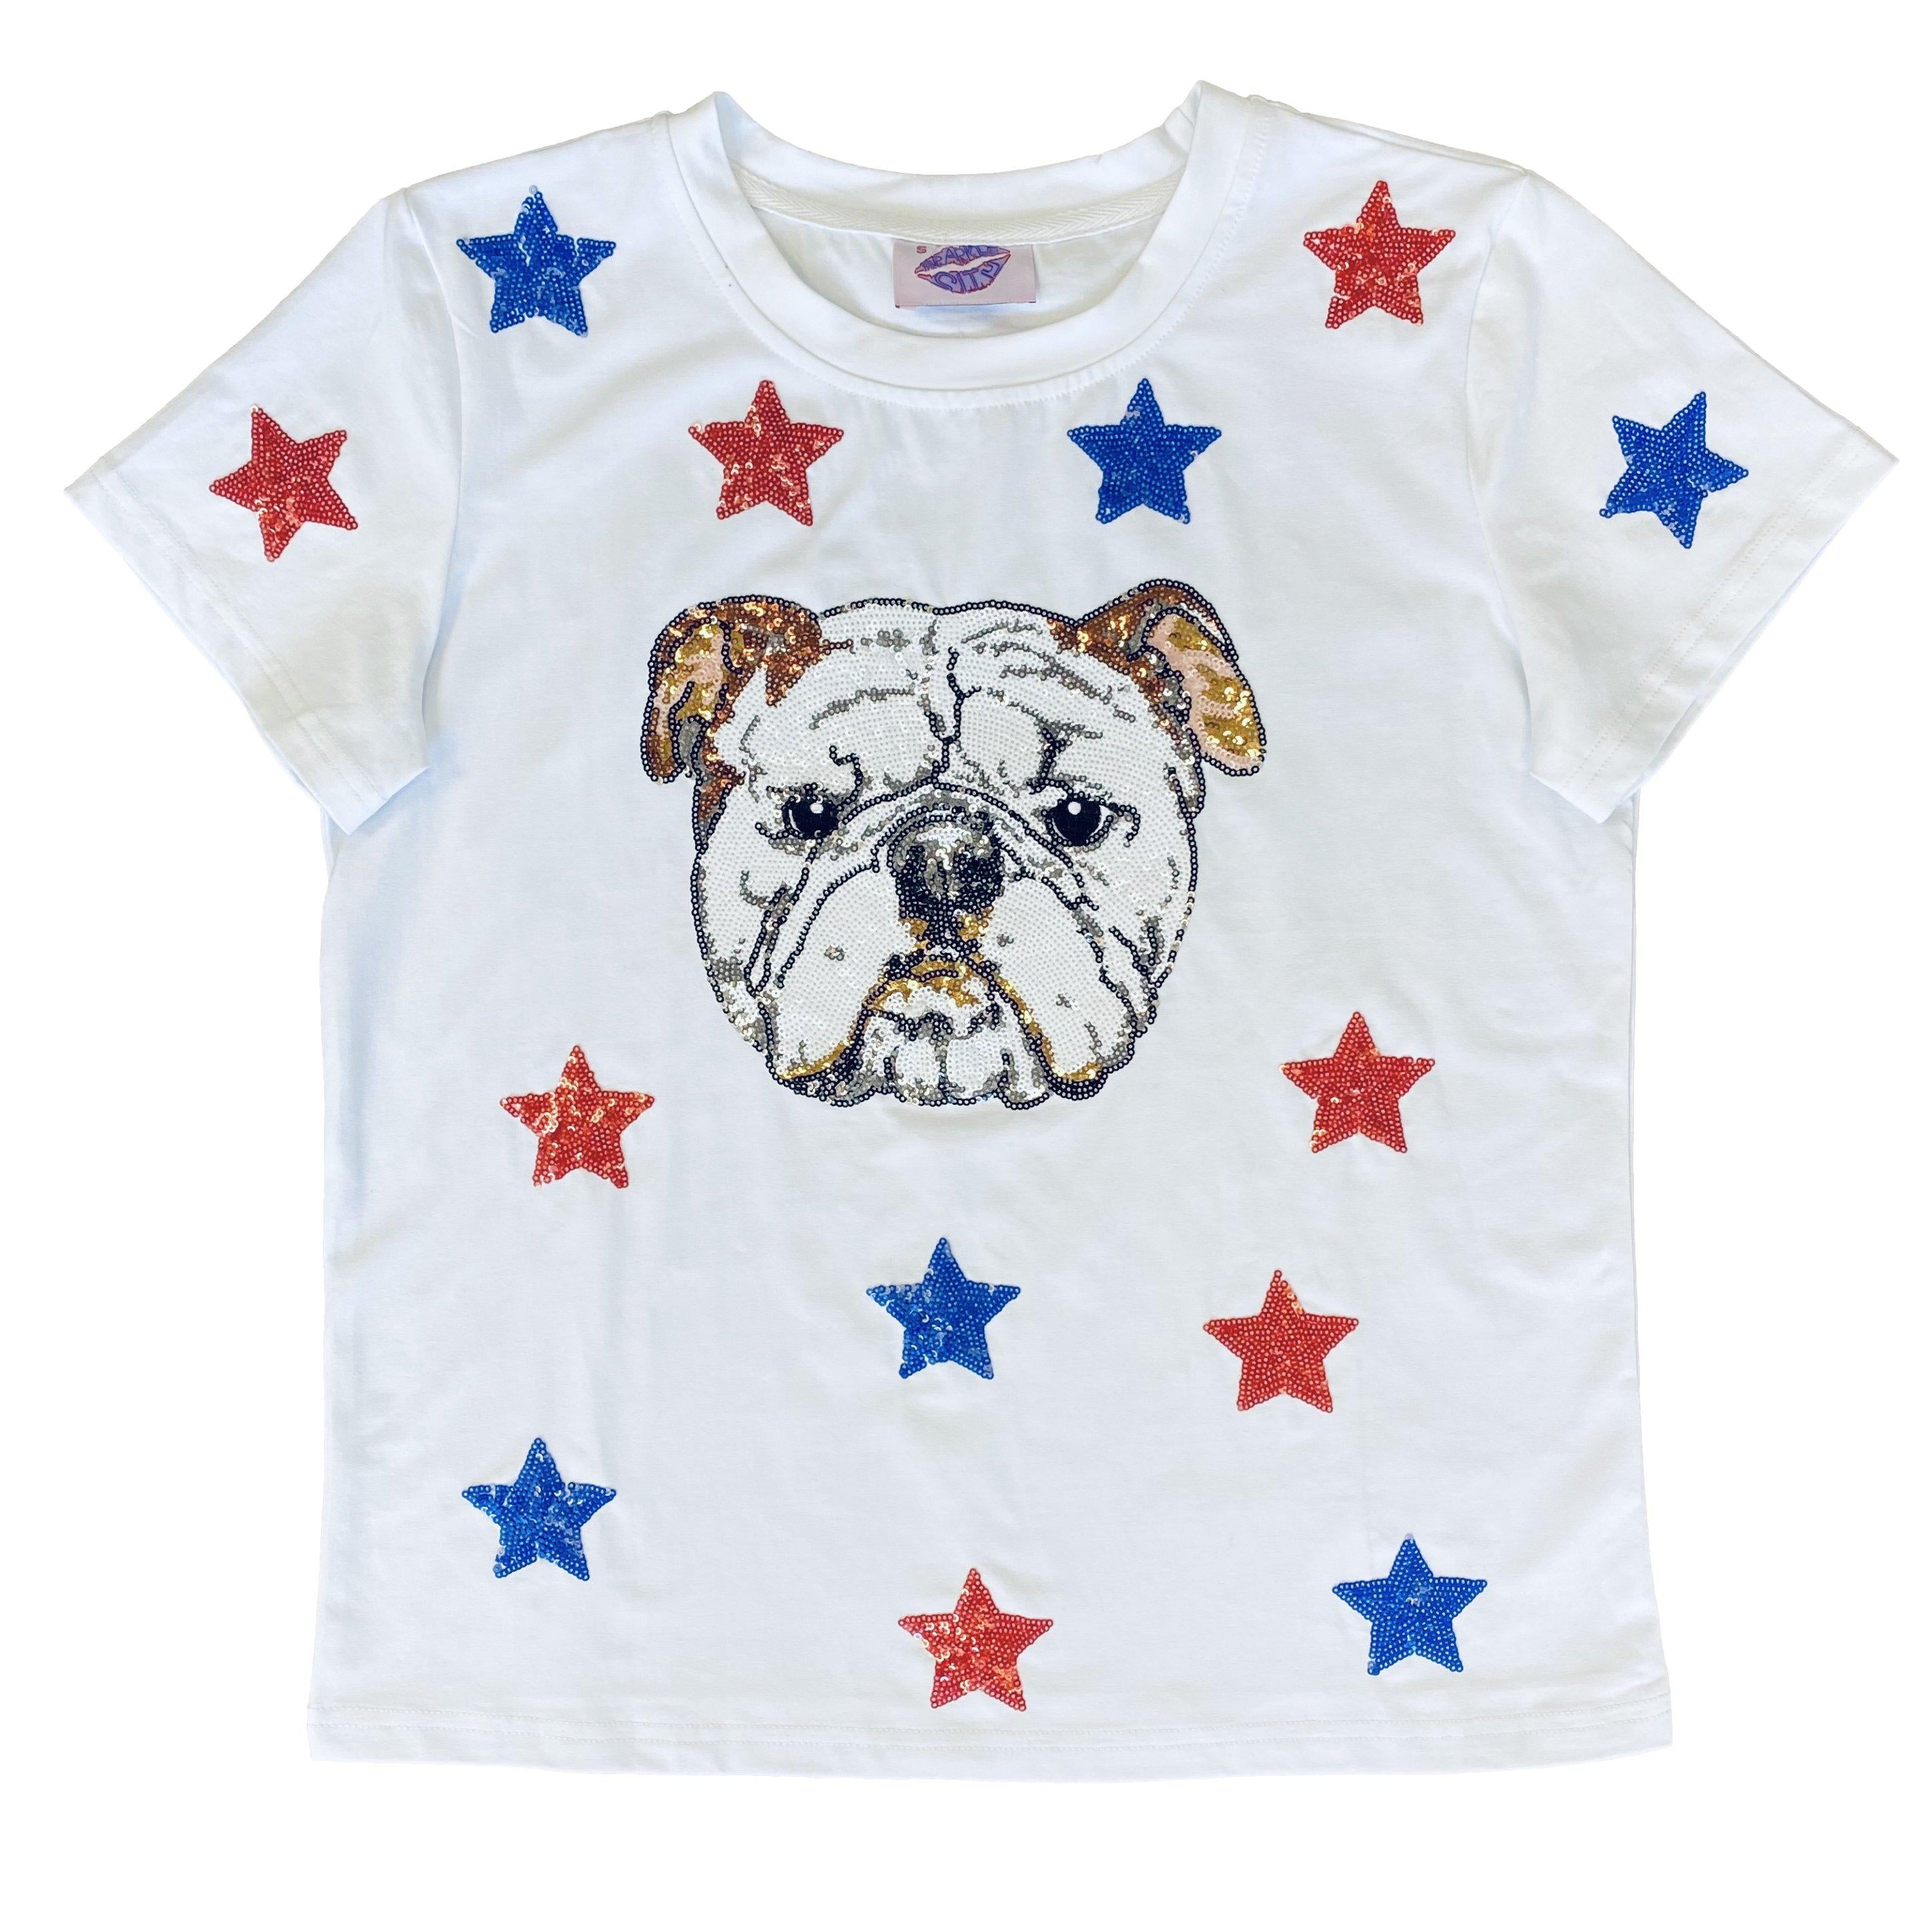 Blue and Red Star Struck Bulldog Tee